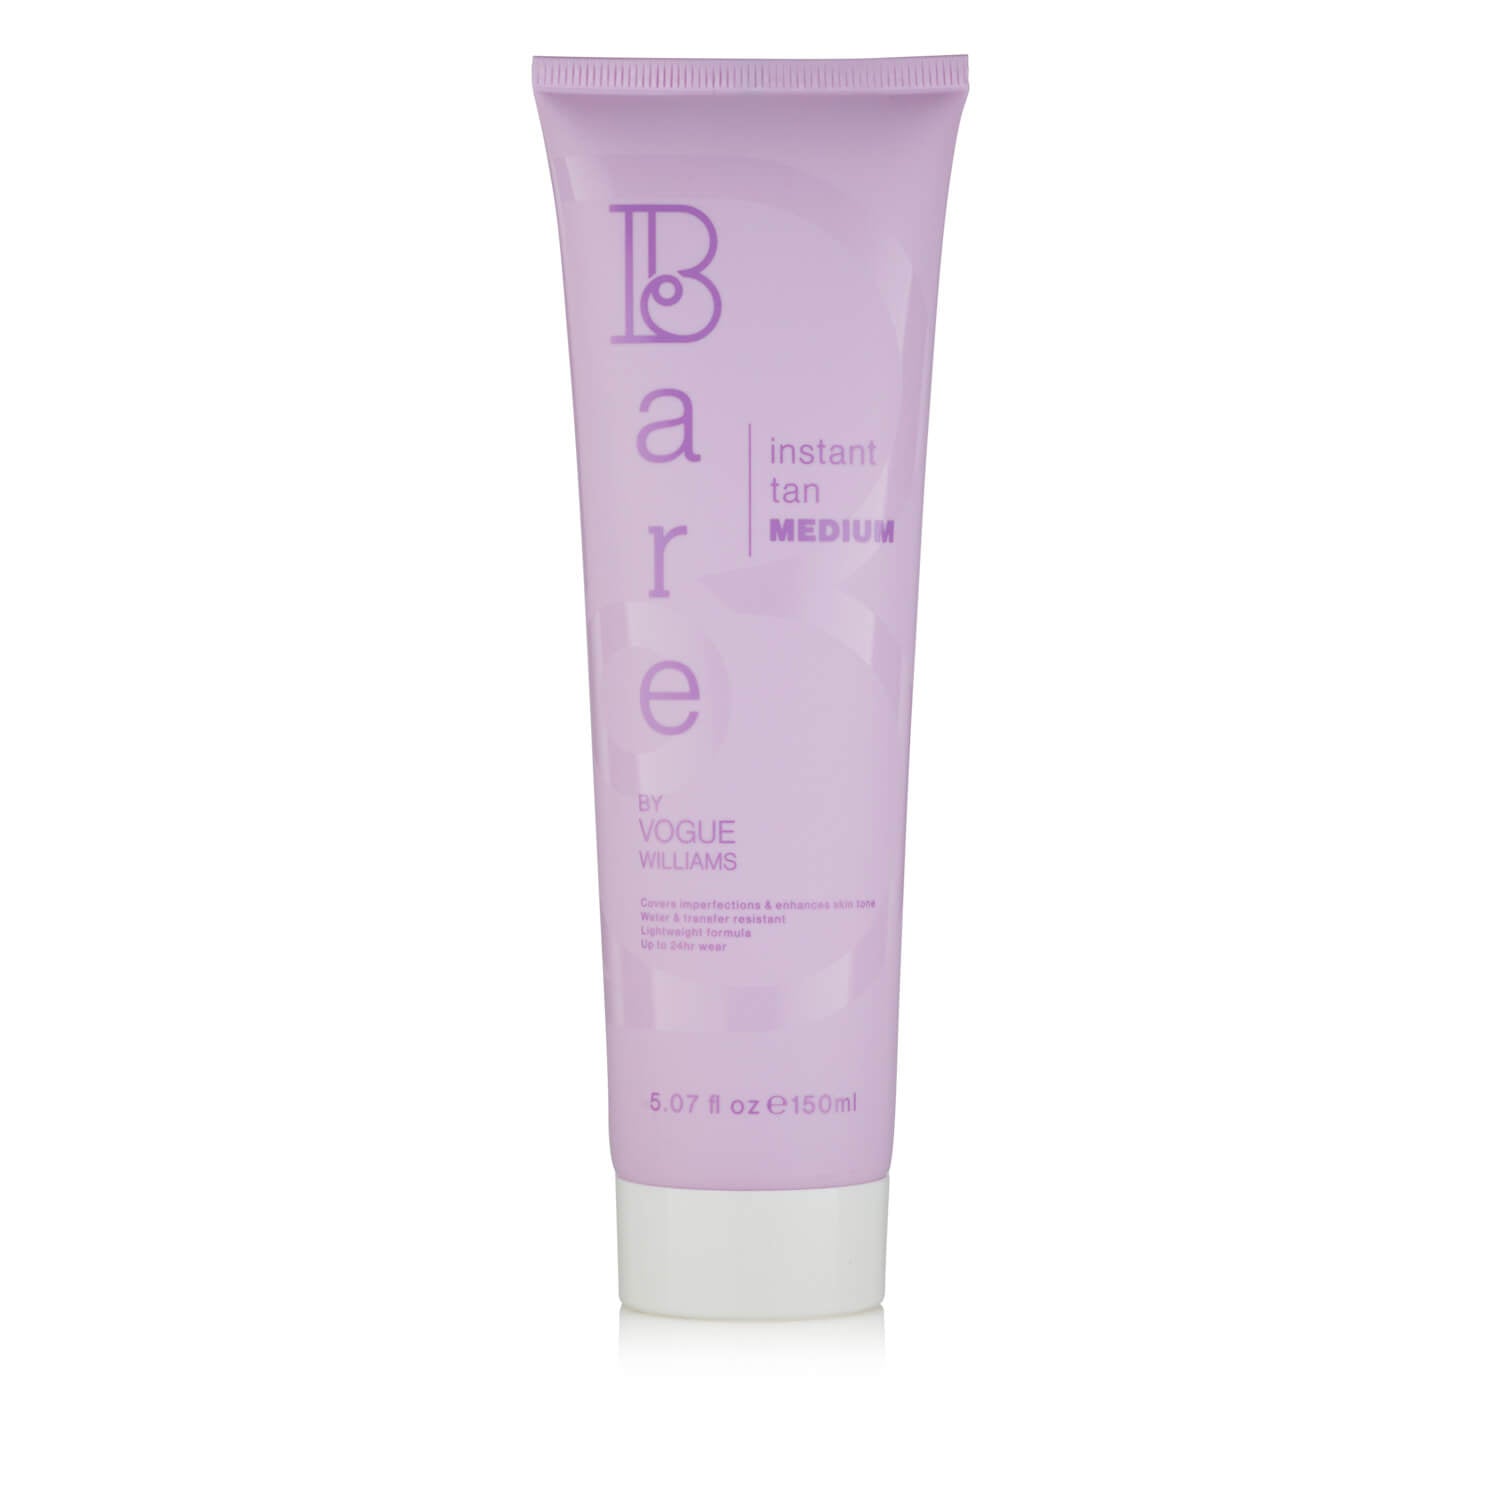 Bare By Vogue Instant Tan 150ml – Medium 1 Shaws Department Stores